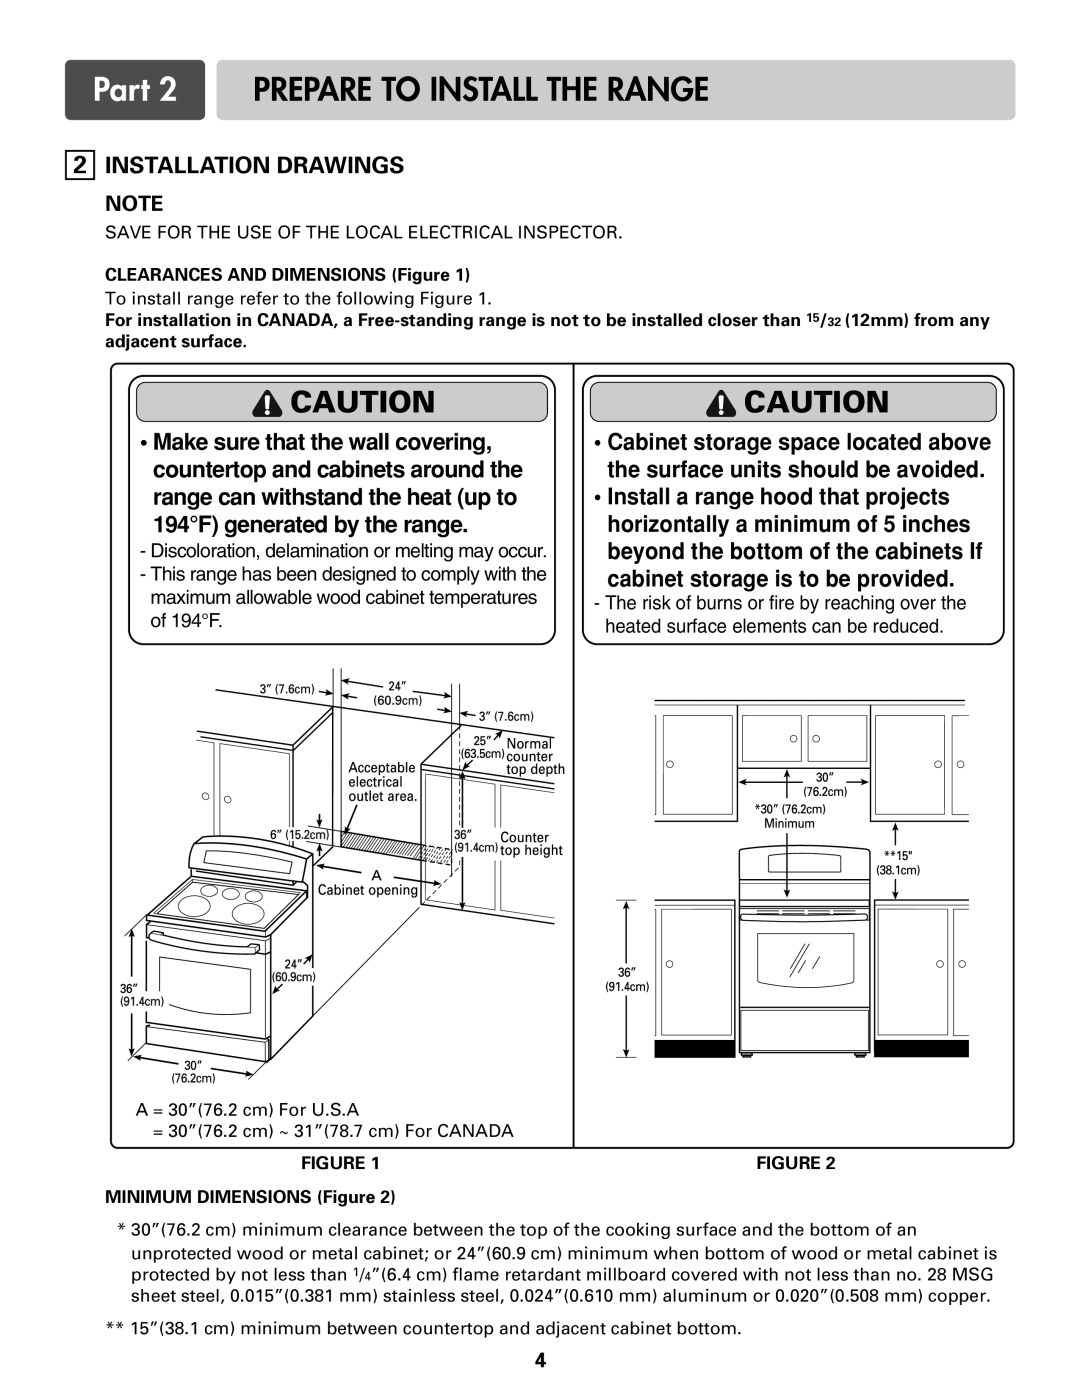 LG Electronics LRE3012S installation manual Part 2 PREPARE TO INSTALL THE RANGE, Installation Drawings 